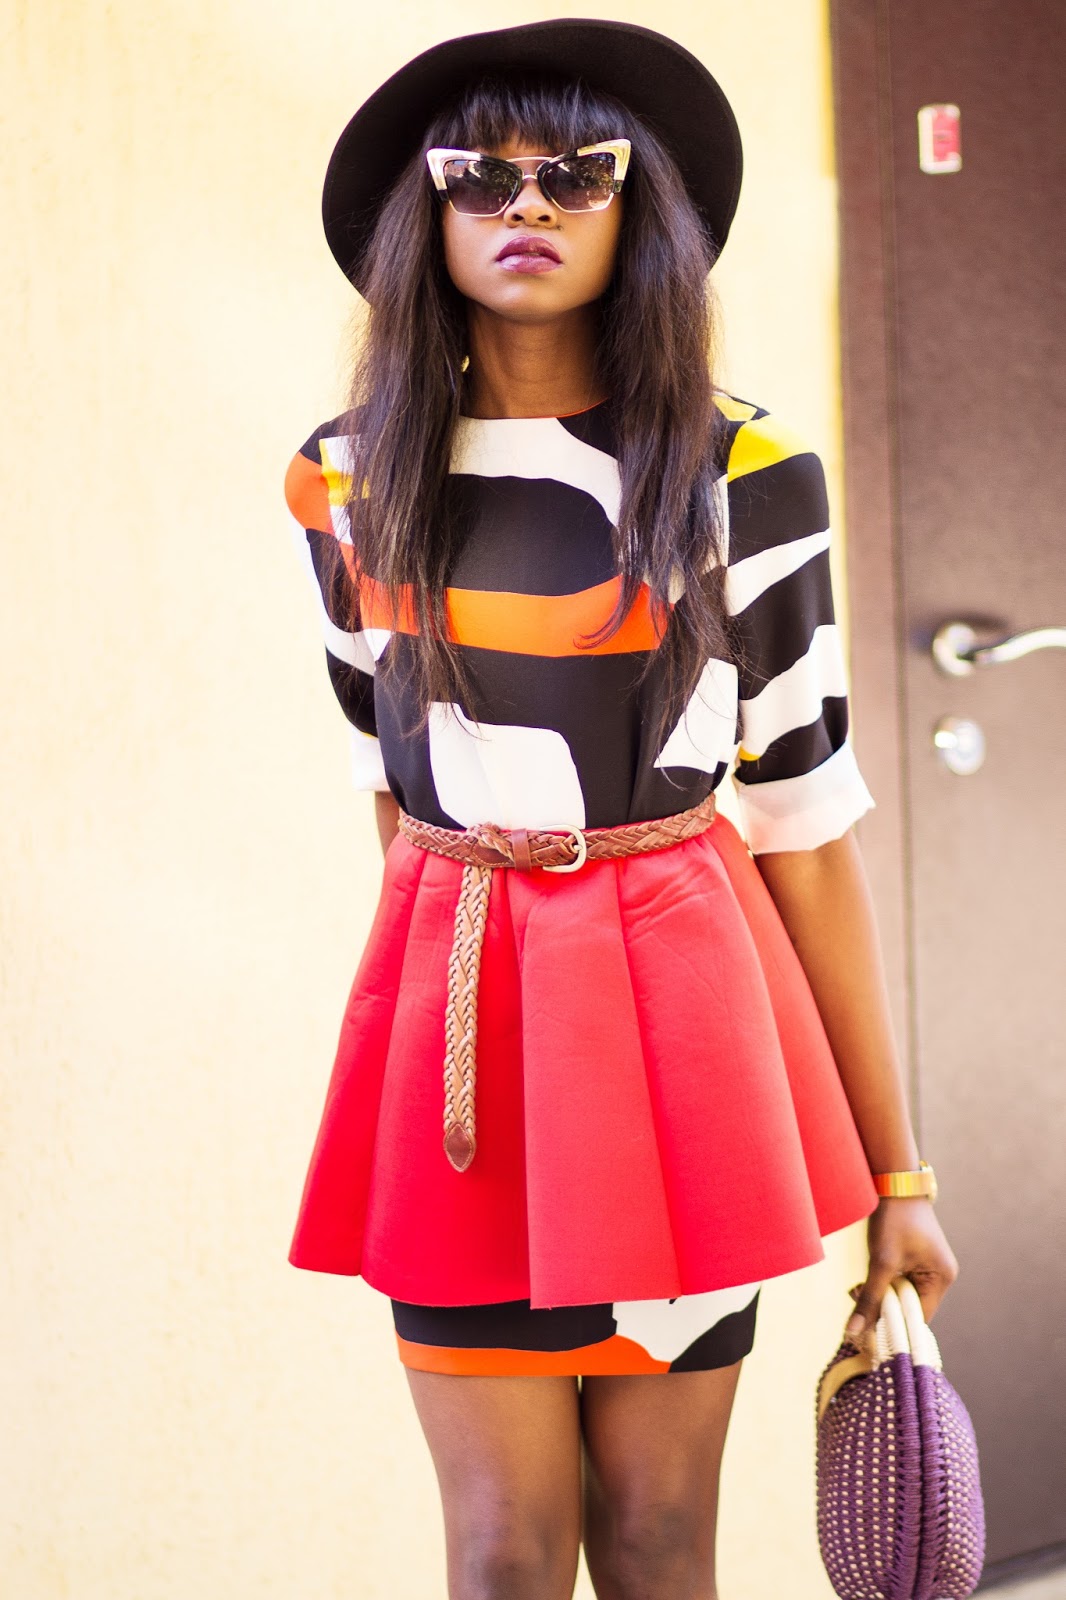 GRAFFITI X STRUCTURED : TWO WAYS TO STYLE ONE SKIRT